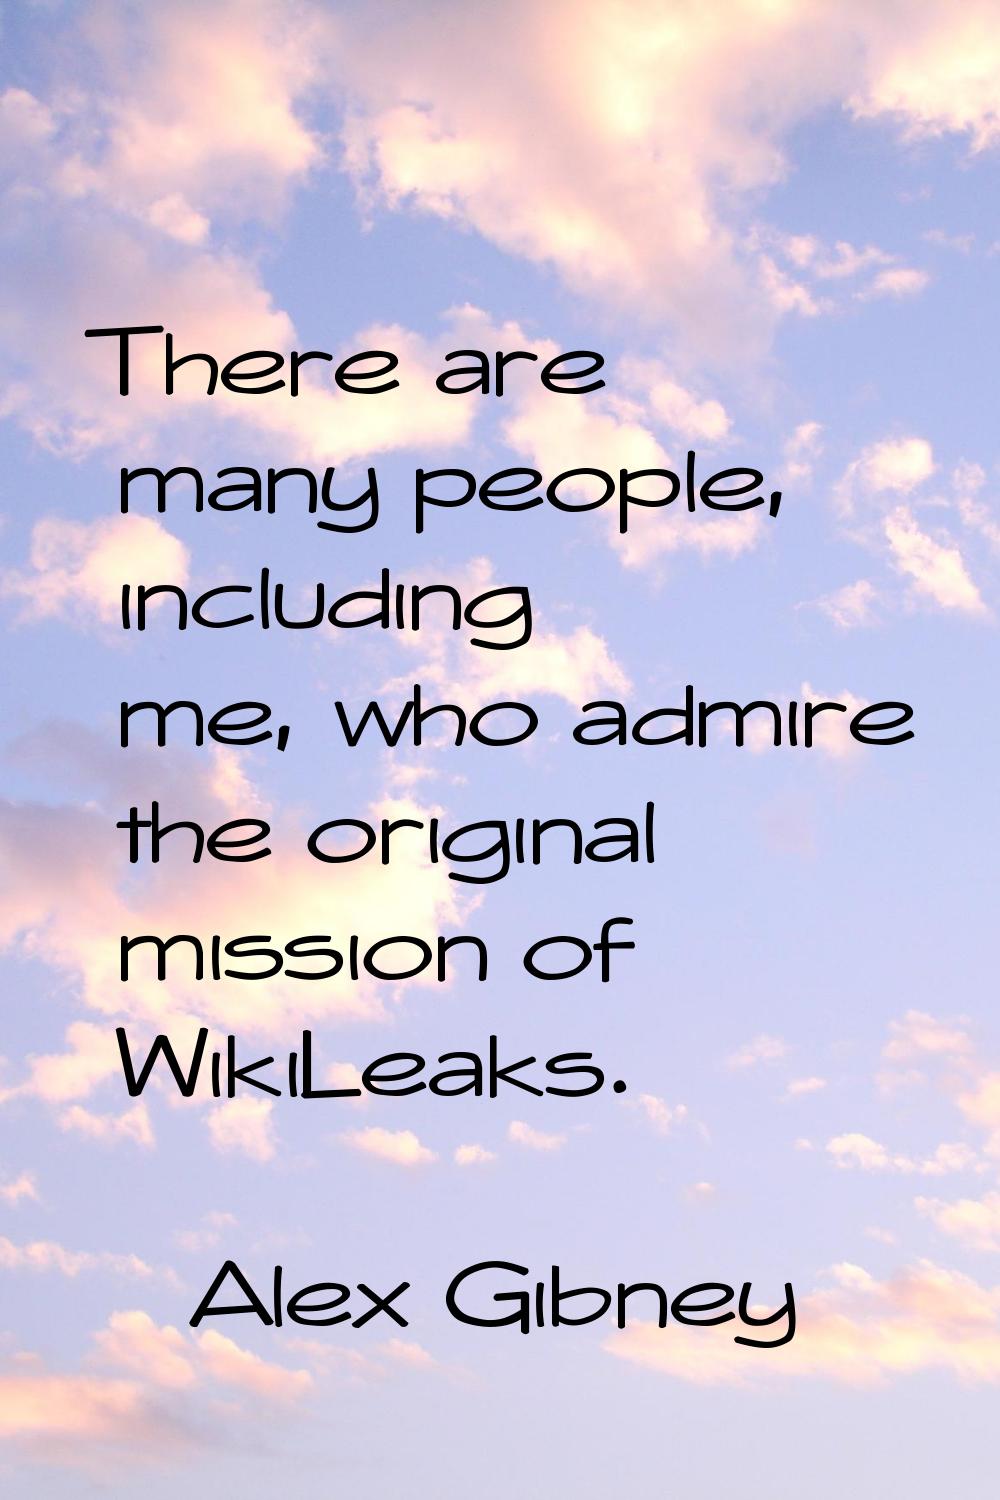 There are many people, including me, who admire the original mission of WikiLeaks.